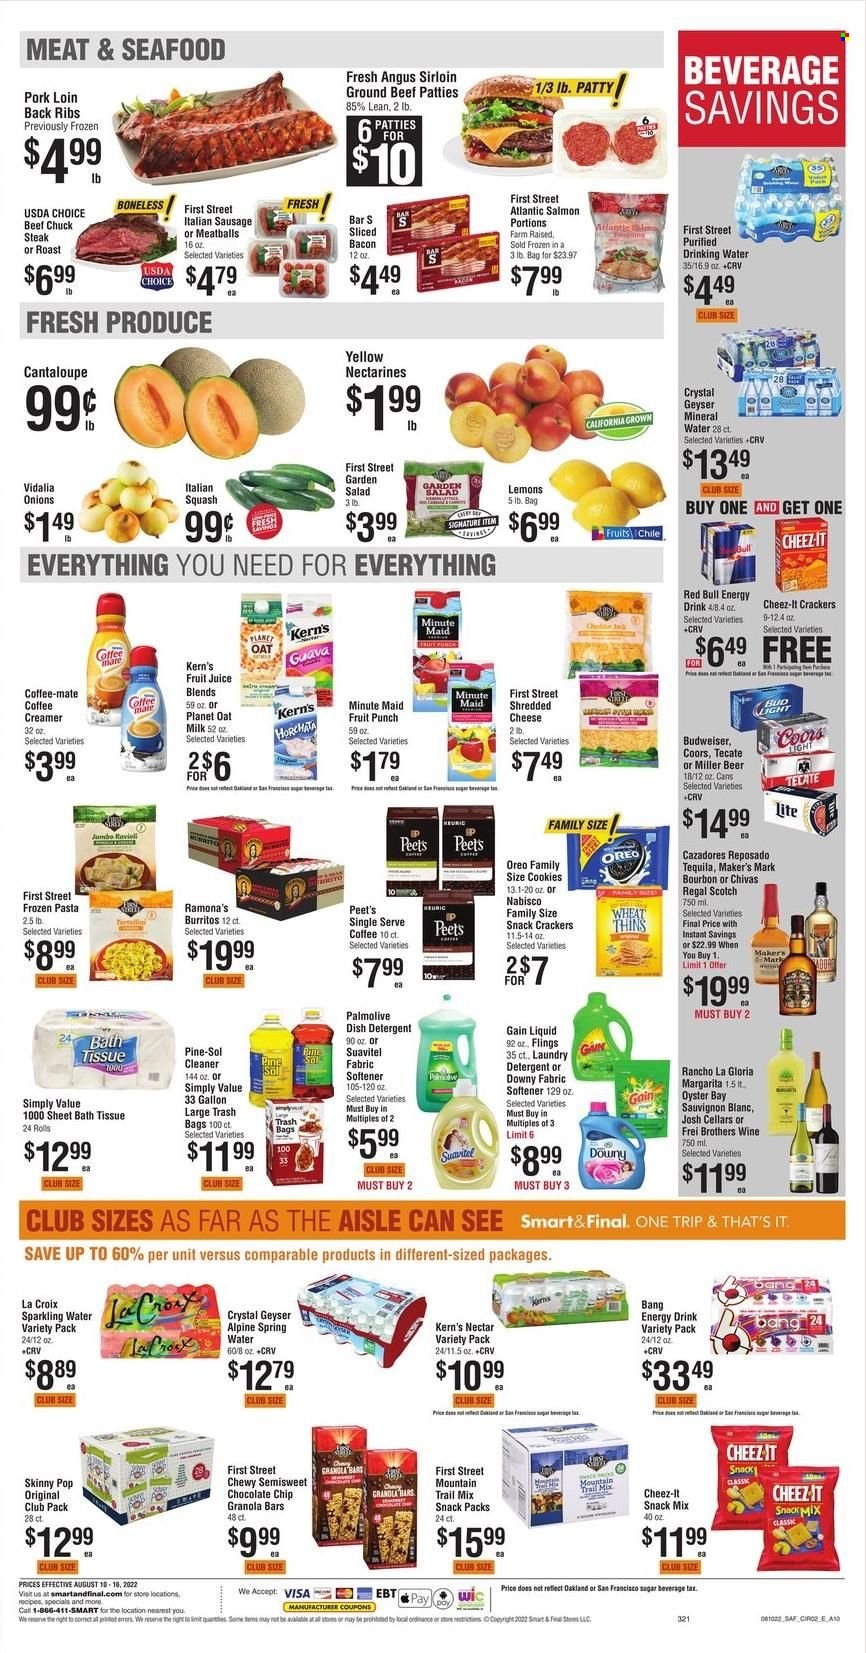 thumbnail - Smart & Final Flyer - 08/10/2022 - 08/16/2022 - Sales products - cantaloupe, onion, salad, guava, salmon, oysters, seafood, ravioli, meatballs, burrito, bacon, sausage, italian sausage, shredded cheese, Oreo, Coffee-Mate, milk, oat milk, creamer, cookies, snack, crackers, Thins, Cheez-It, Skinny Pop, sugar, granola bar, trail mix, juice, fruit juice, energy drink, Red Bull, Kern's, fruit punch, mineral water, spring water, sparkling water, Ciro, Keurig, white wine, wine, Sauvignon Blanc, tequila, Chivas Regal, beer, Bud Light, Miller, beef meat, ground beef, steak, chuck steak, pork loin, pork meat, bath tissue, Gain, fabric softener, laundry detergent, Downy Laundry, dishwasher cleaner, Budweiser, nectarines, Coors, lemons. Page 2.